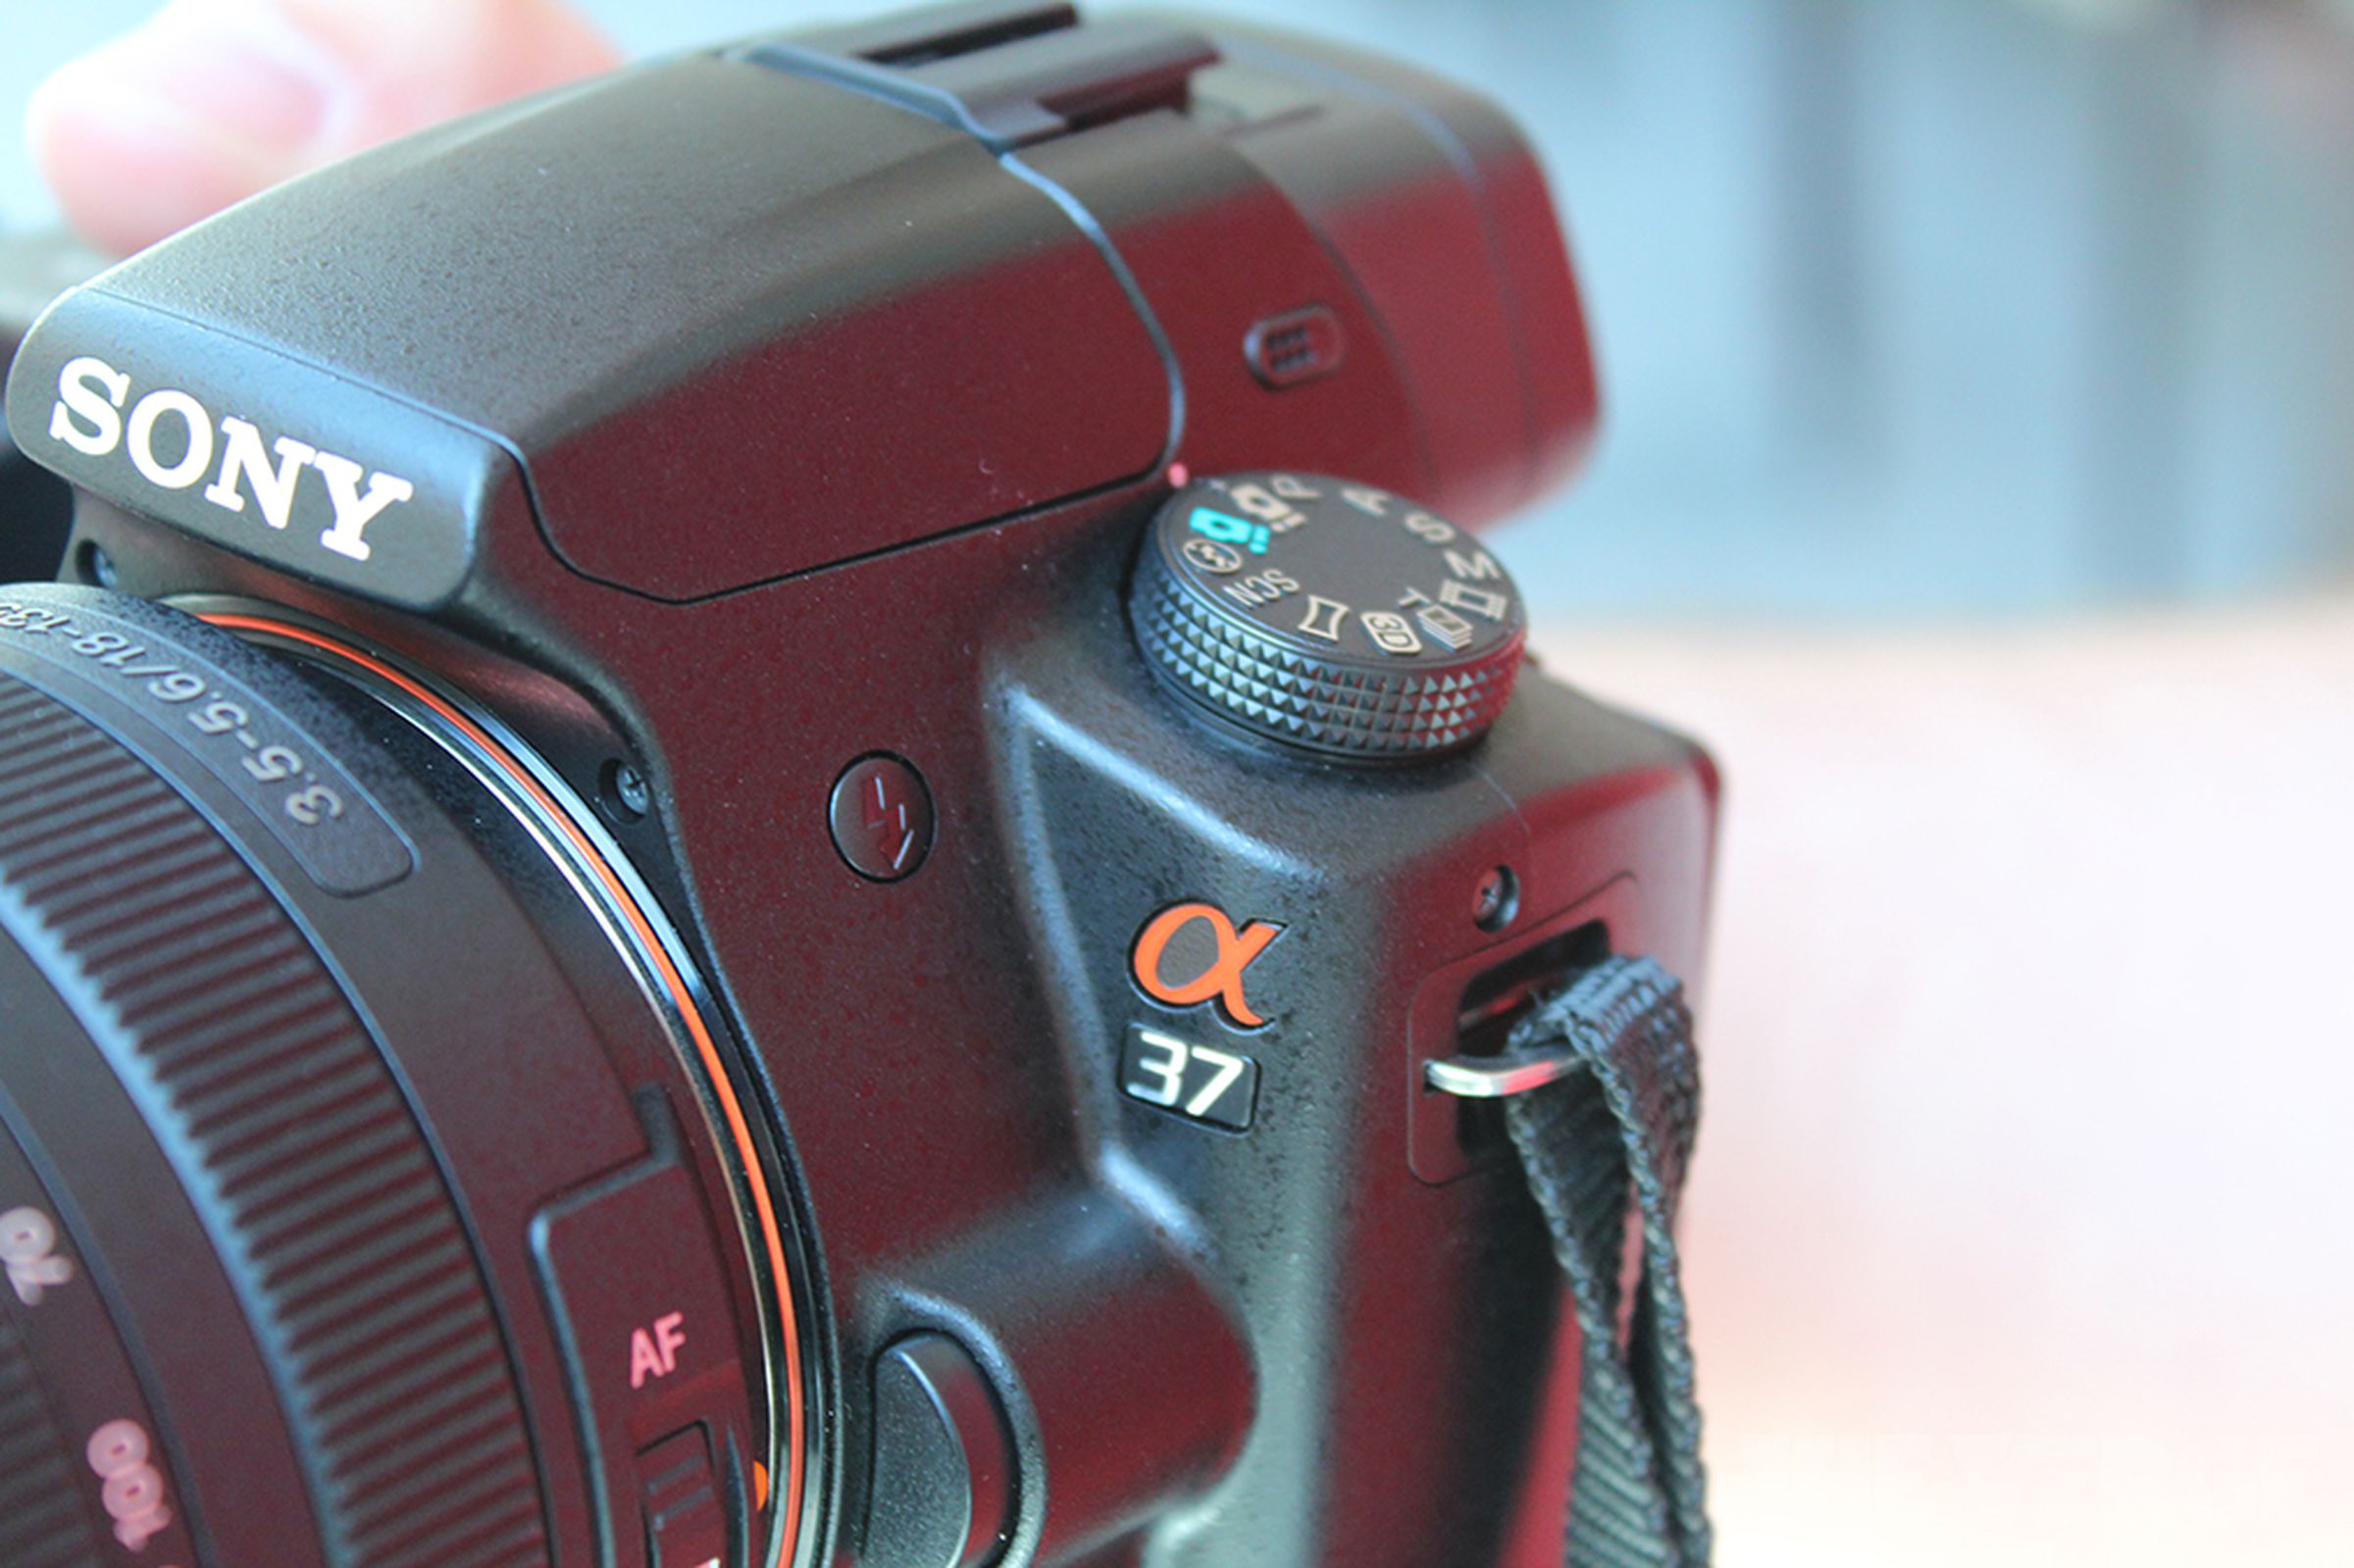 Sony Alpha SLT-A37 hands-on pictures